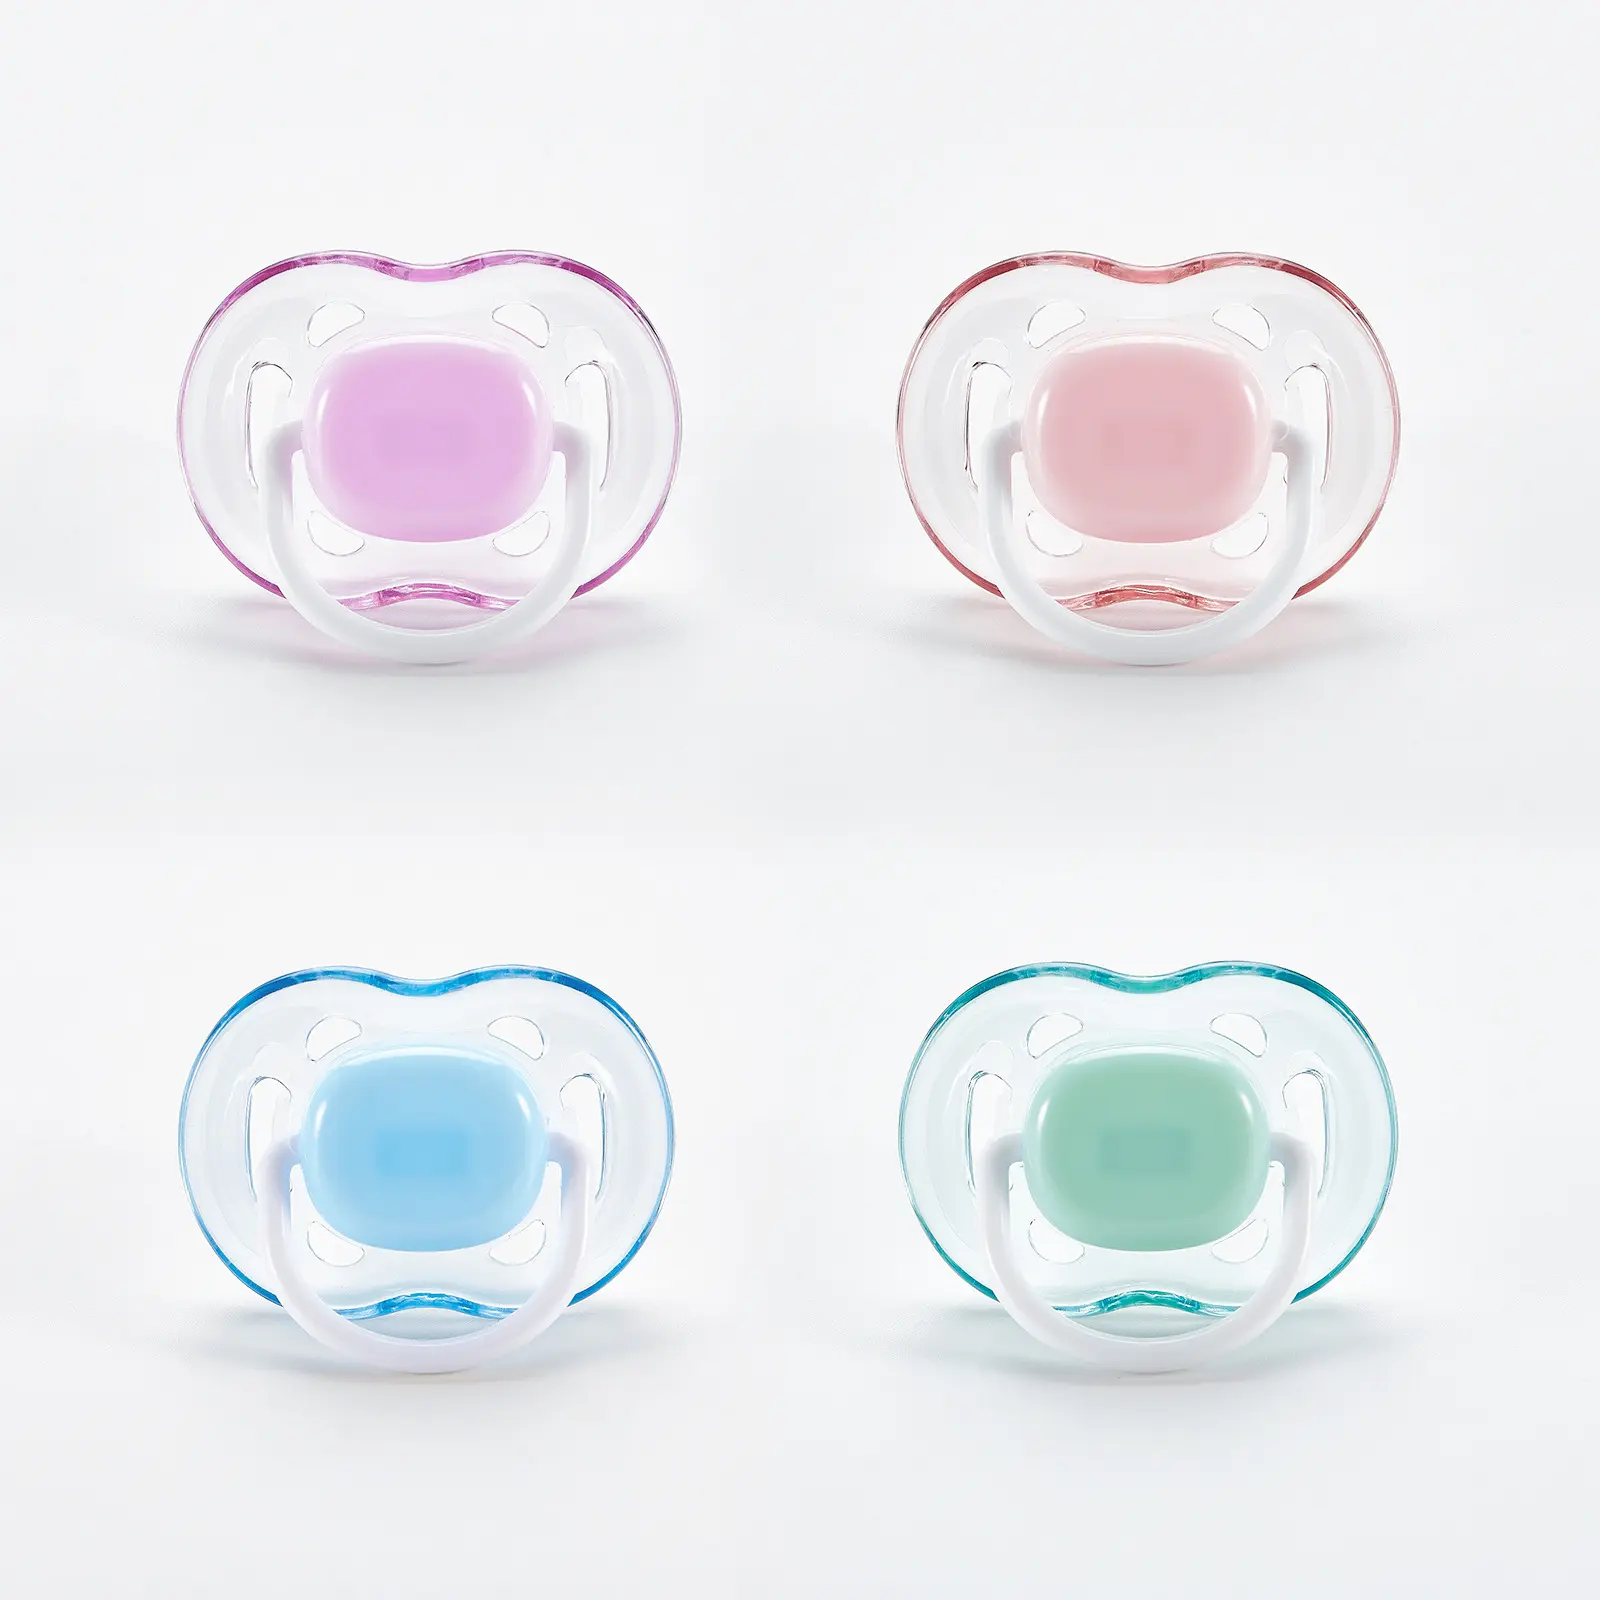 2021 Wholesale Adult Pacifier Bpa Free 4 Colors Of Silicone Soother Adult Pacifier Dummy